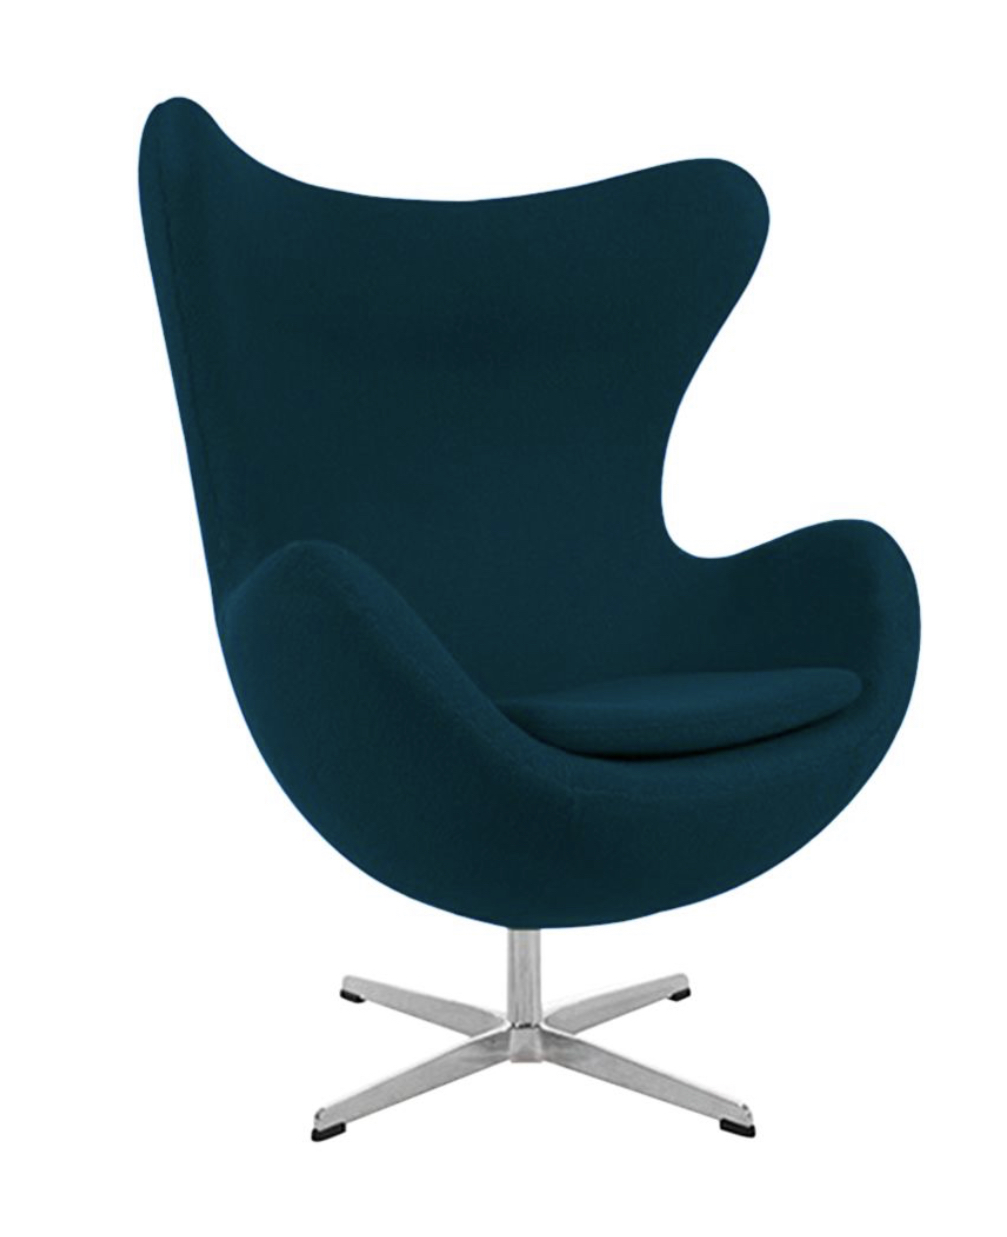 Arne Jacobsen Style Egg Chair Cashmere Teal